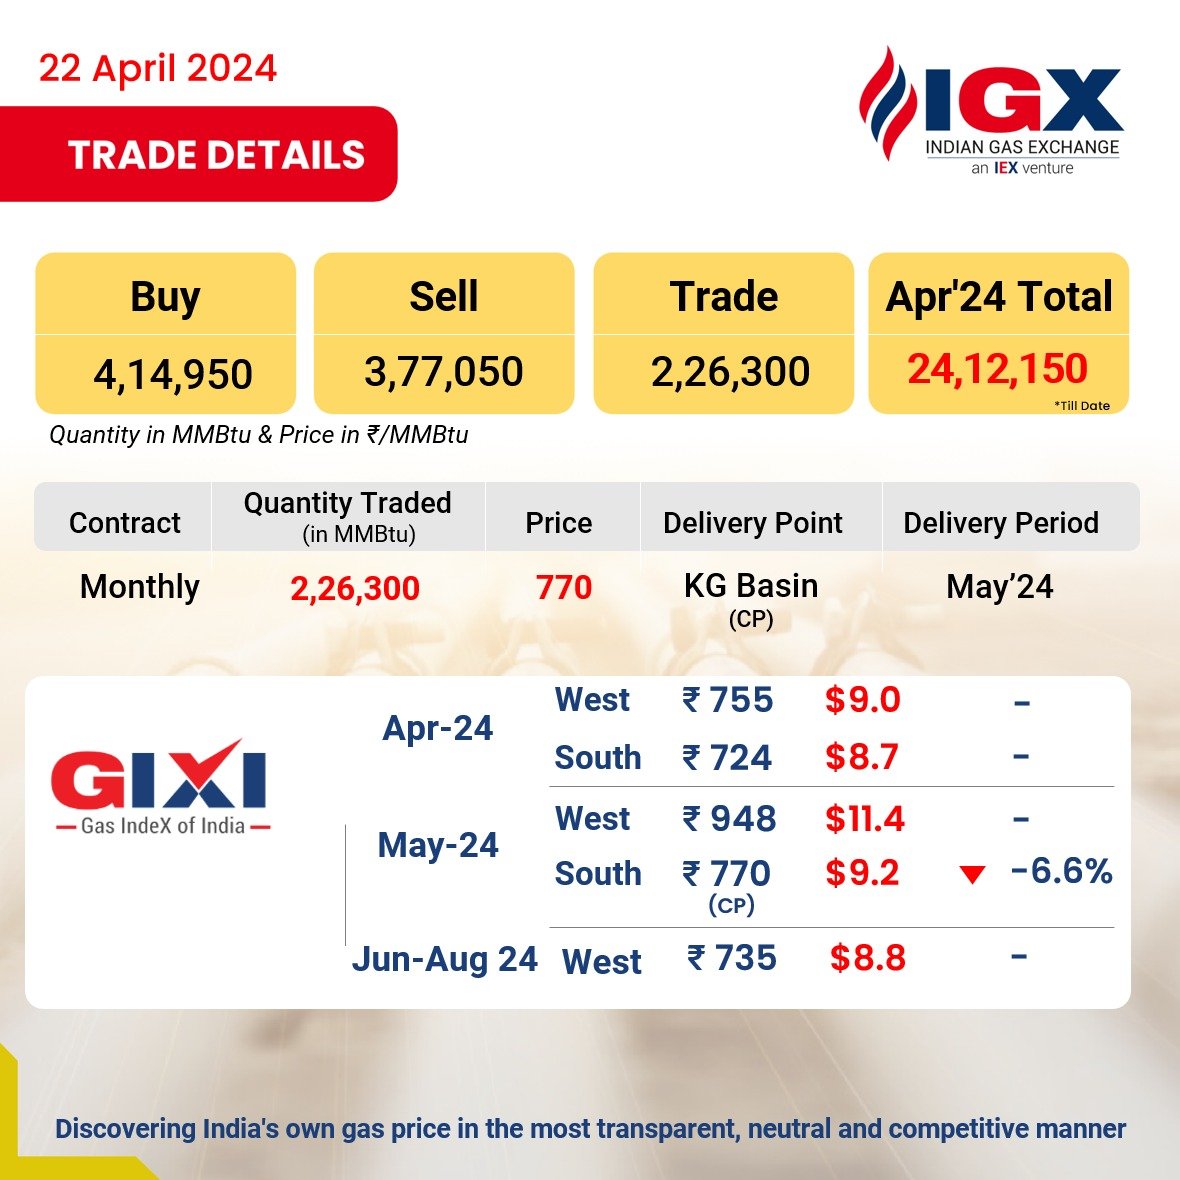 IGX trades 2,26,300 MMBTu quantity at KG Basin, with delivery scheduled for May'24. 
#IGXIndia #GasMarkets #LNG #IGX